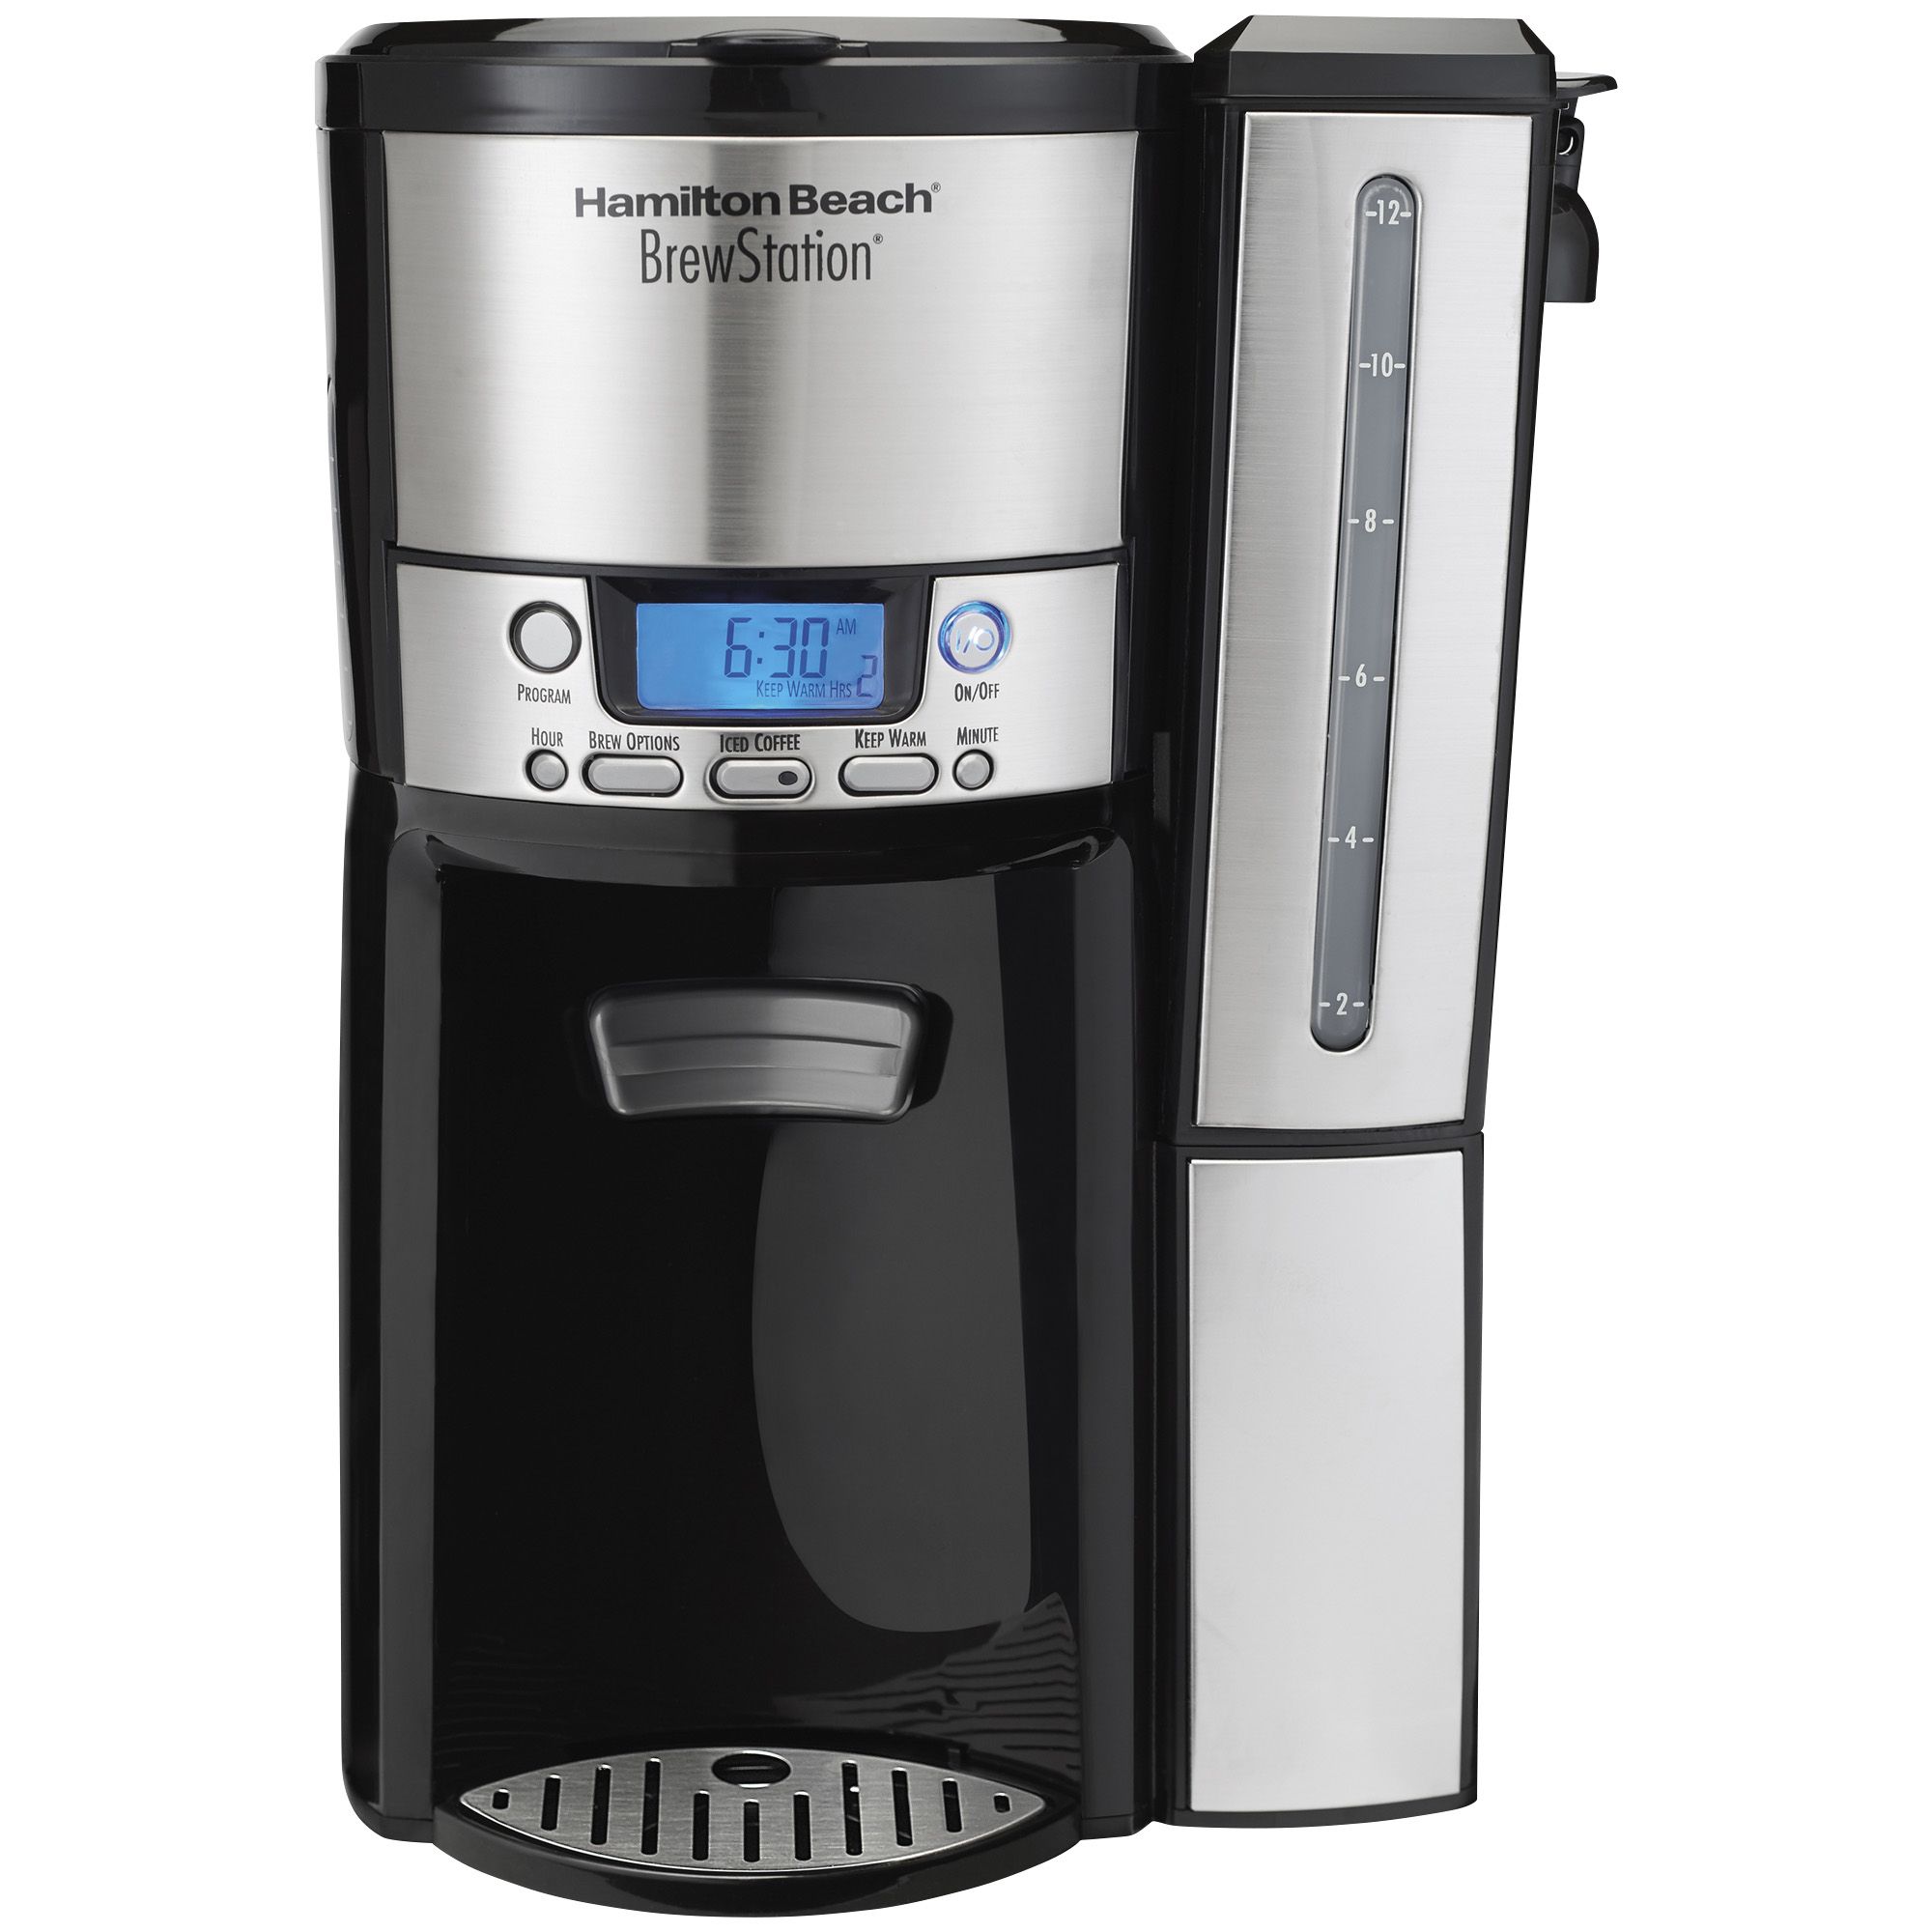  Hamilton Beach 12-Cup Coffee Maker, Programmable BrewStation  Dispensing Coffee Machine, Black - Removable Reservoir (47900): Drip  Coffeemakers: Home & Kitchen